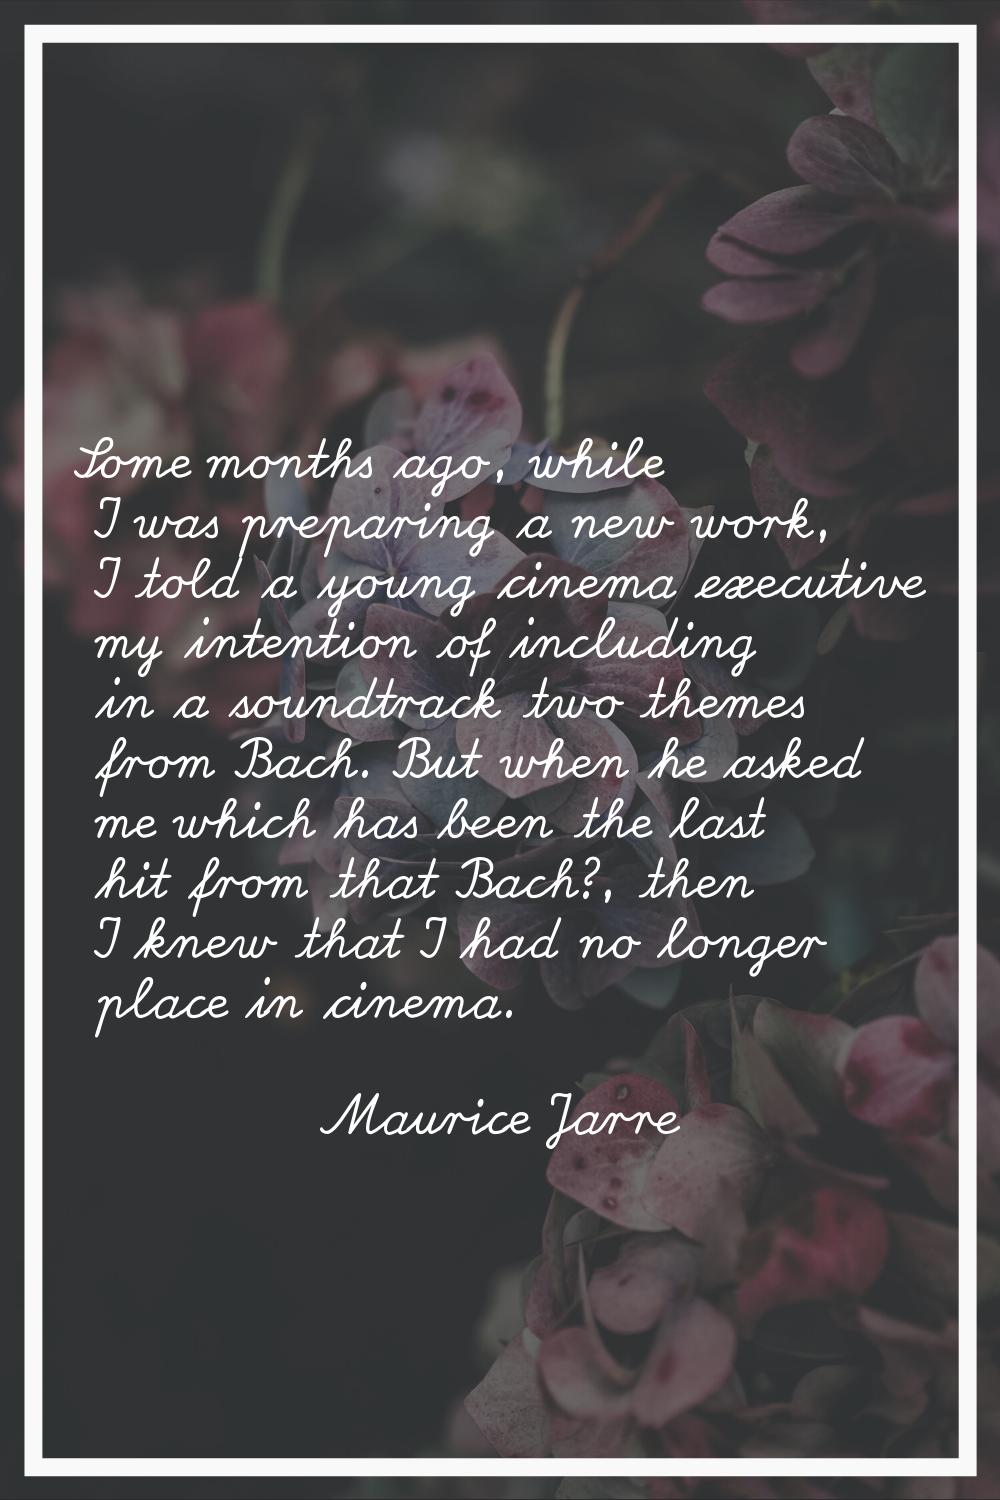 Some months ago, while I was preparing a new work, I told a young cinema executive my intention of 